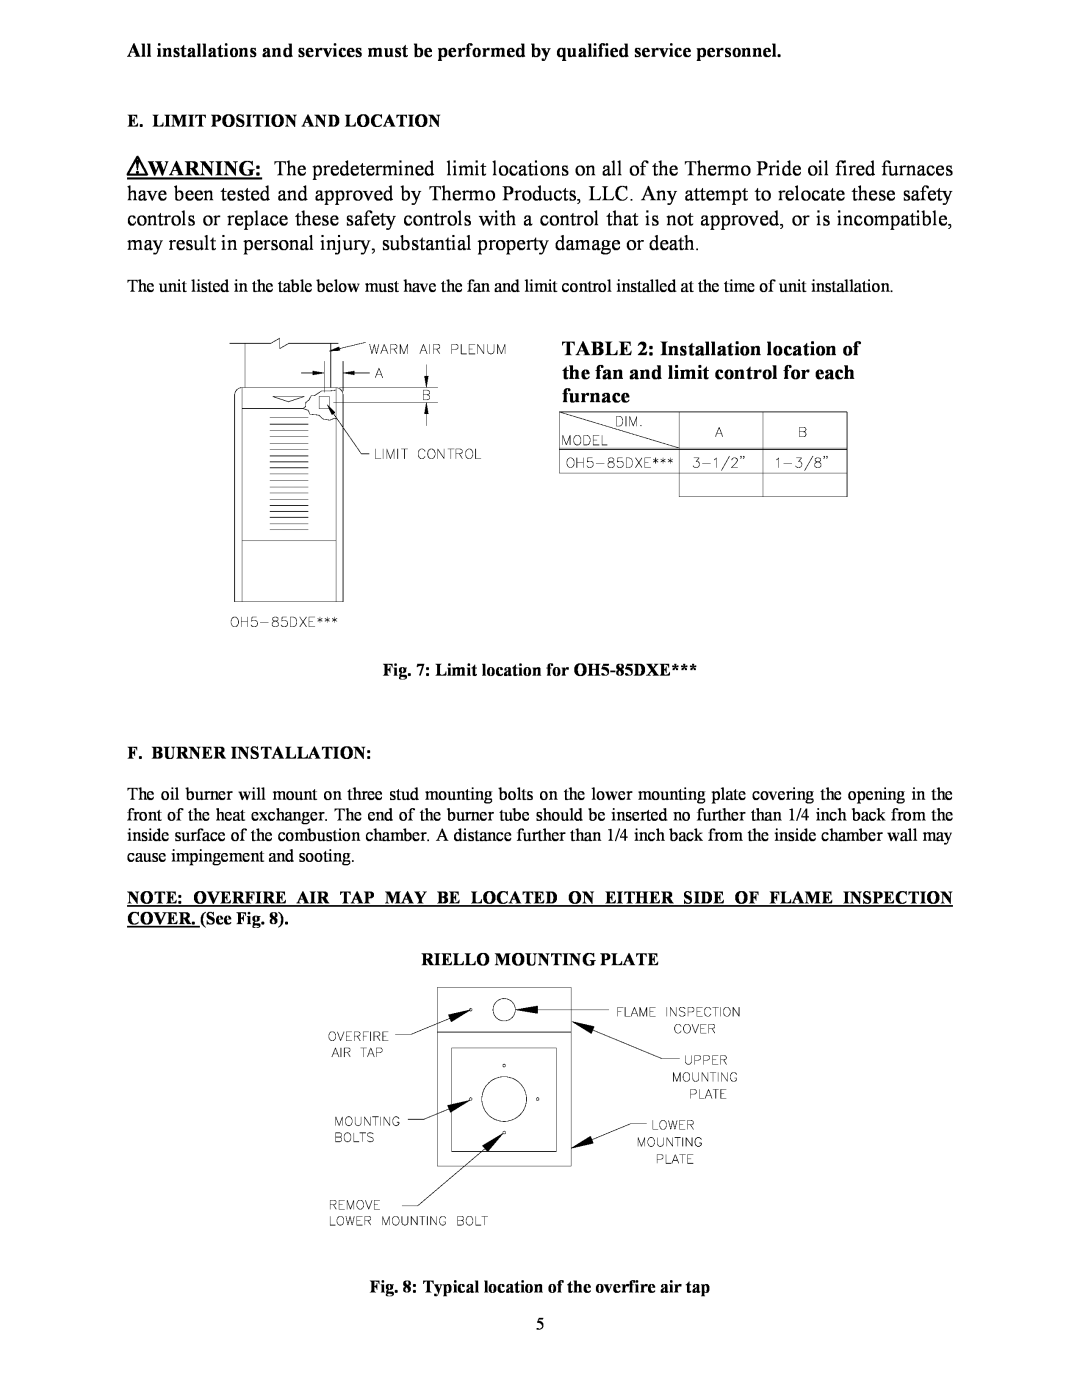 Thermo Products operation manual E. Limit Position And Location, Limit location for OH5-85DXE, F. Burner Installation 